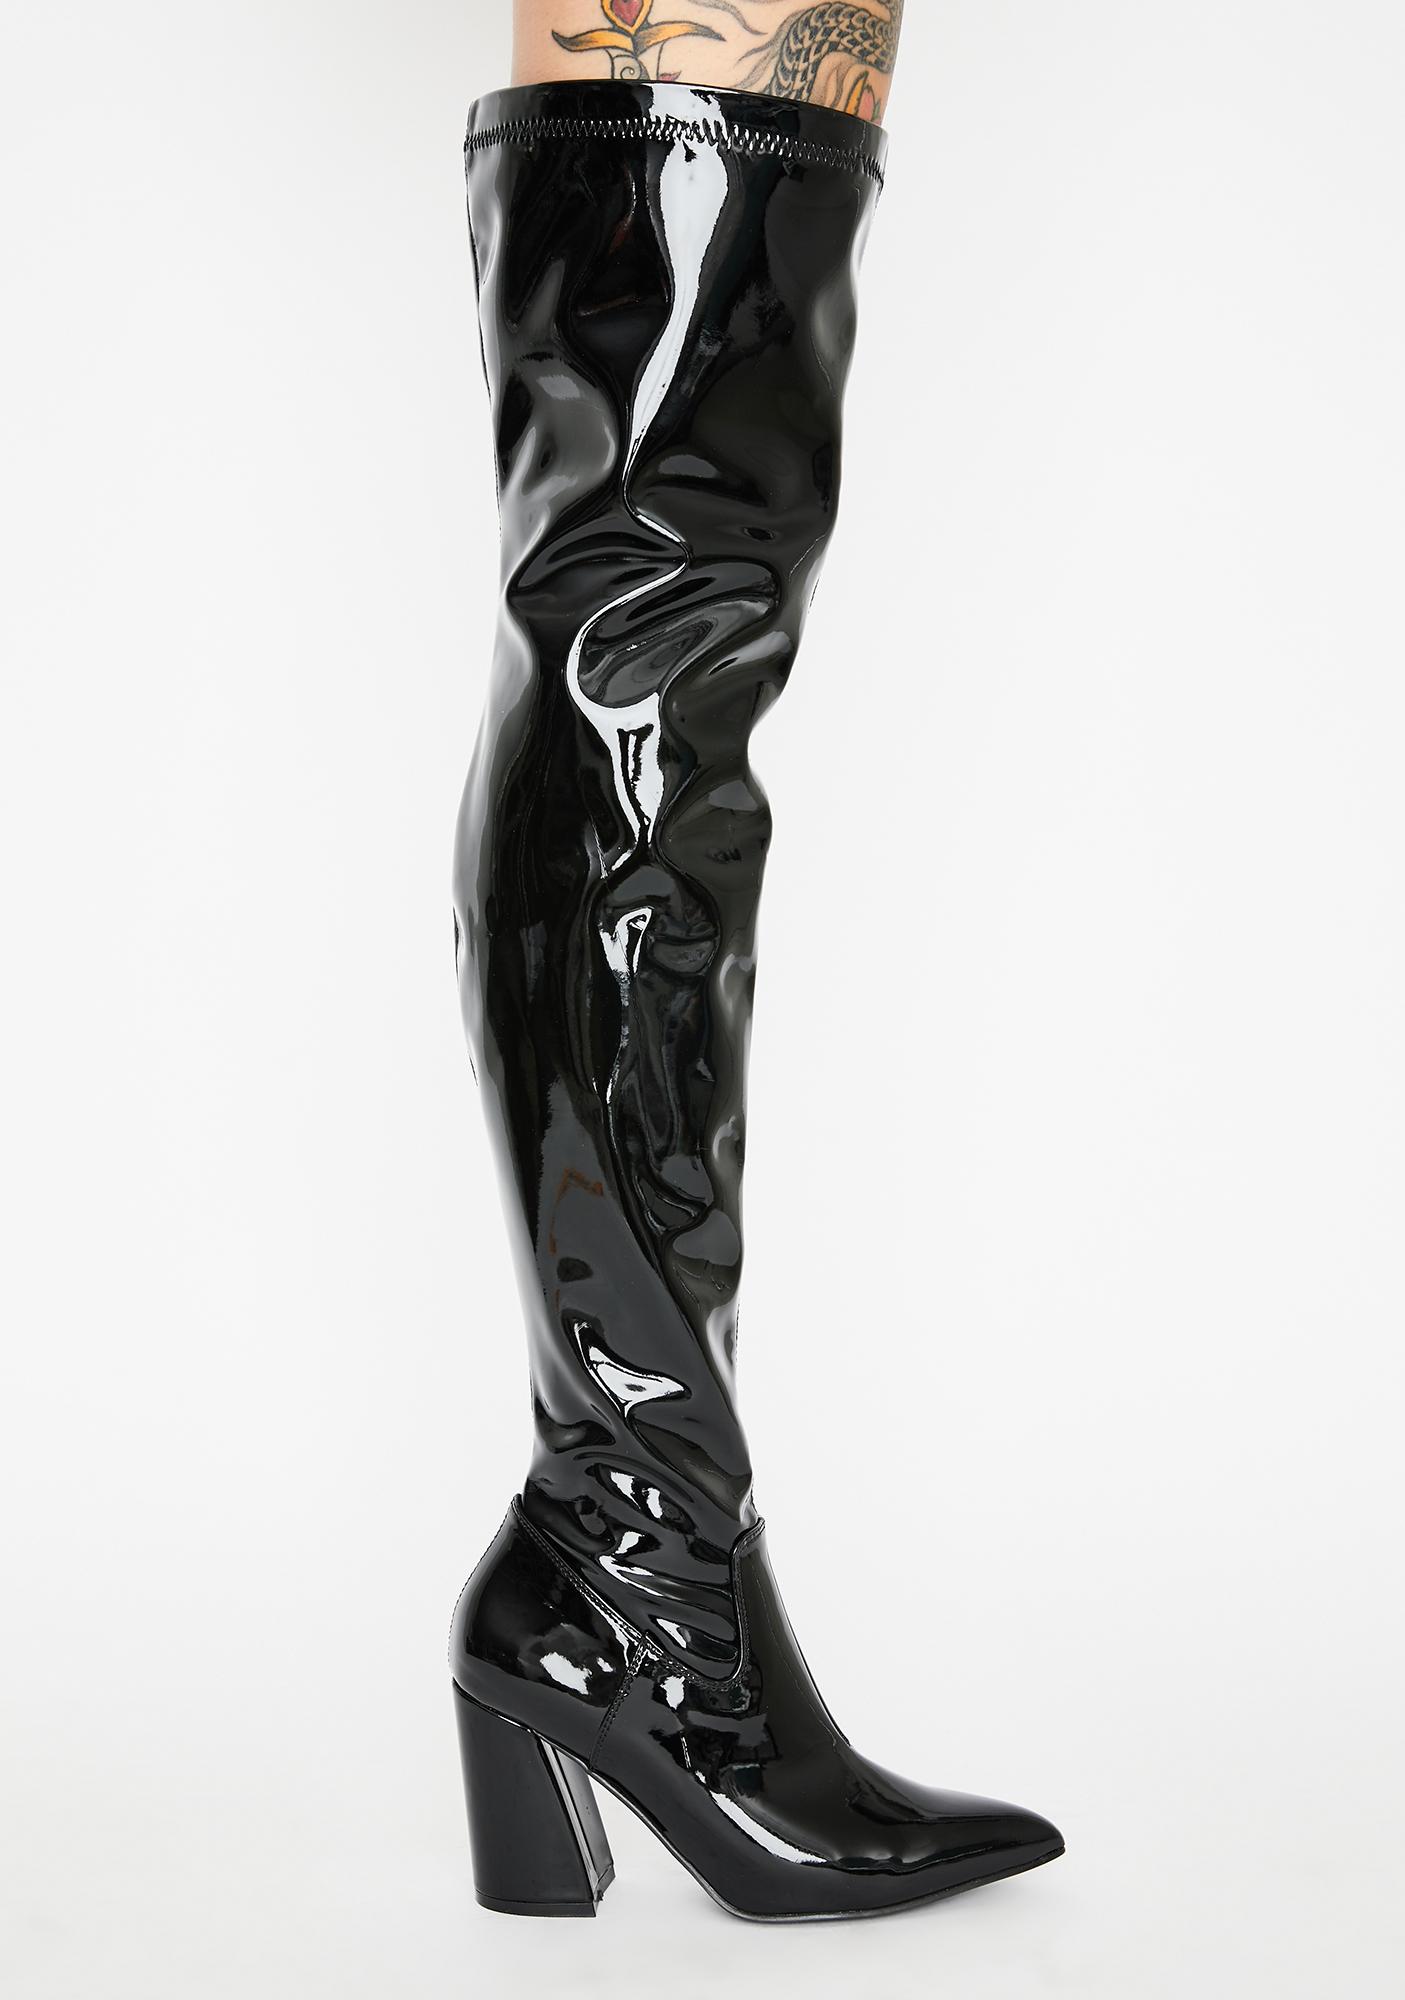 thigh high black patent leather boots